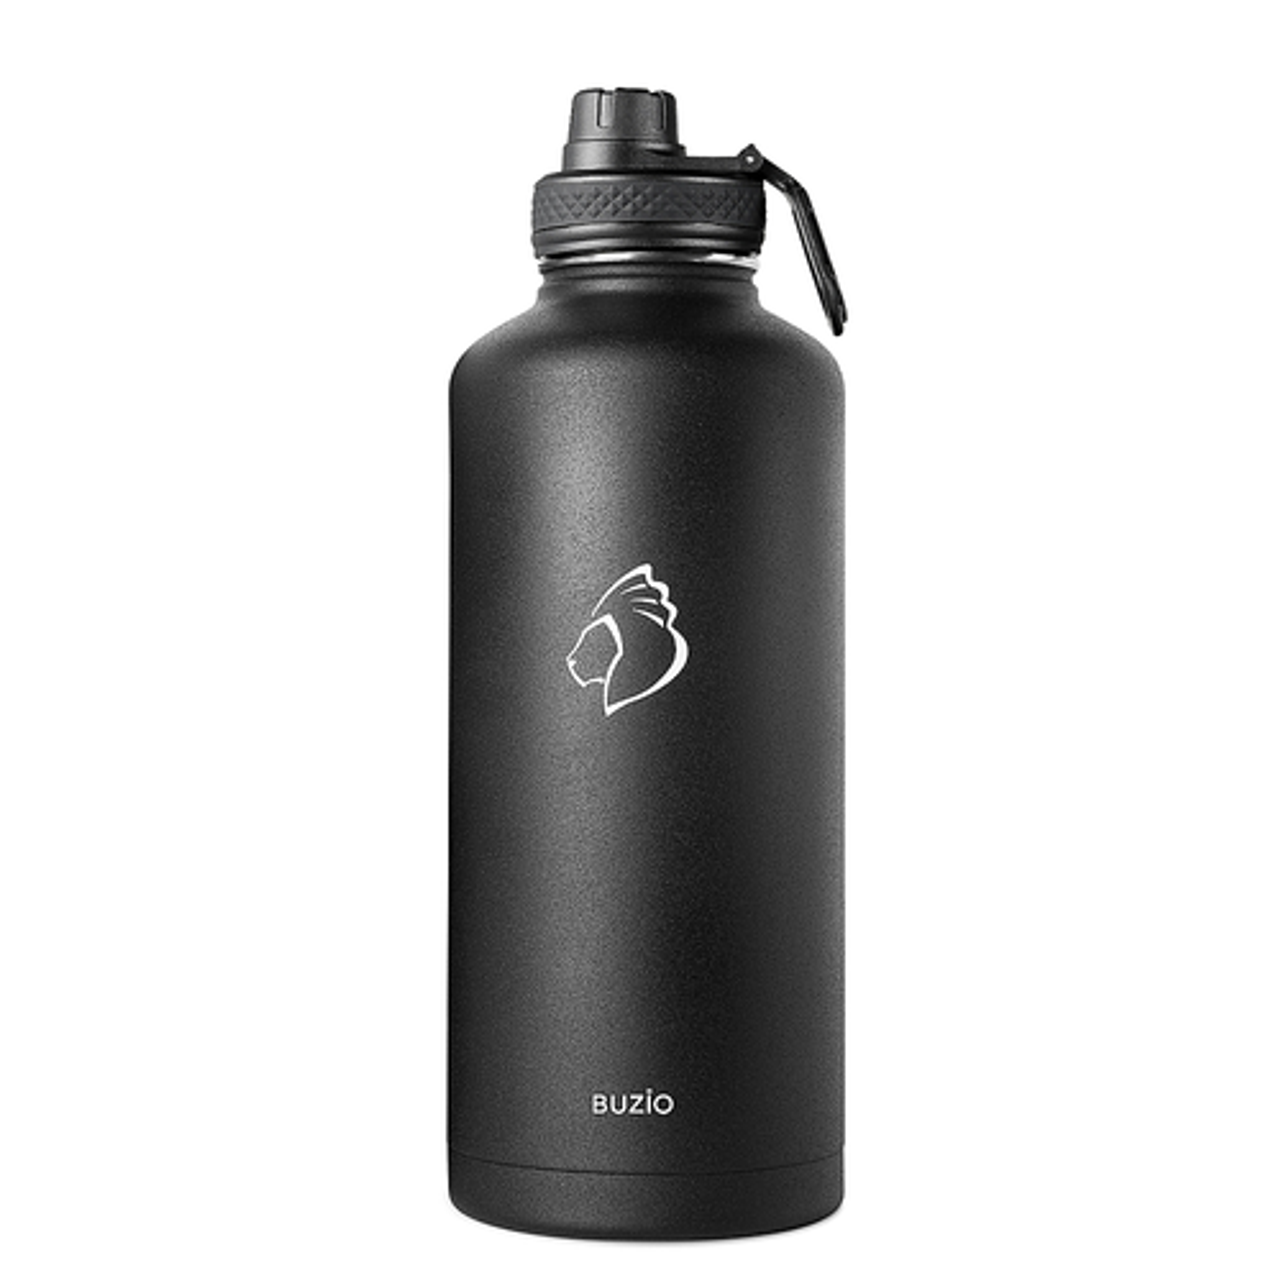 Buzio - 87oz Insulated Water Bottle with Straw Lid and Spout Lid - Black